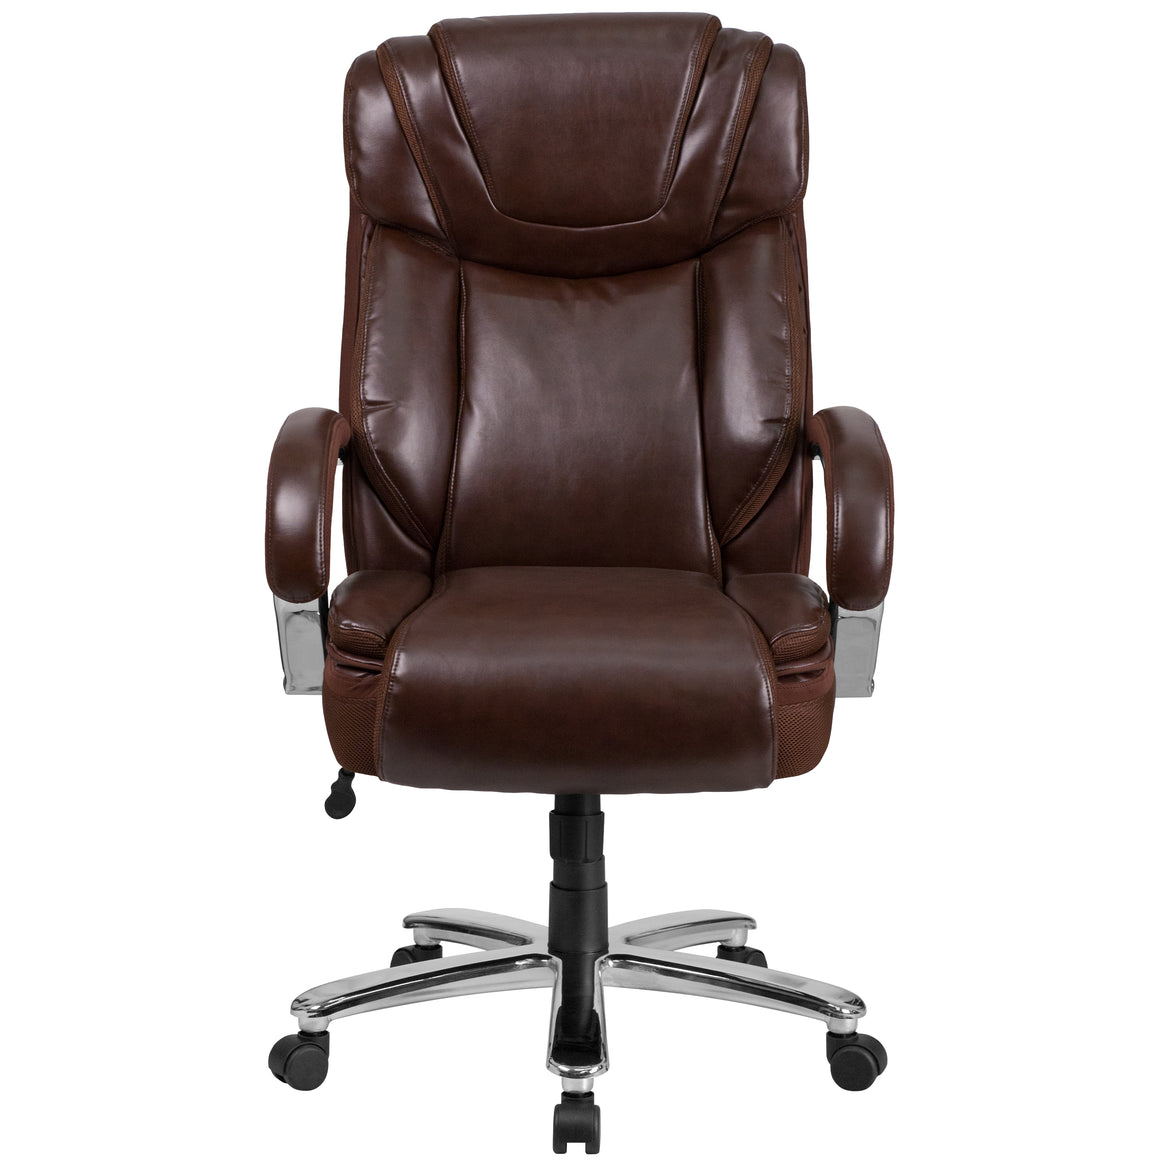 Hercules 500 LB. Capacity Big & Tall Brown Leather Executive Chair - Man Cave Boutique